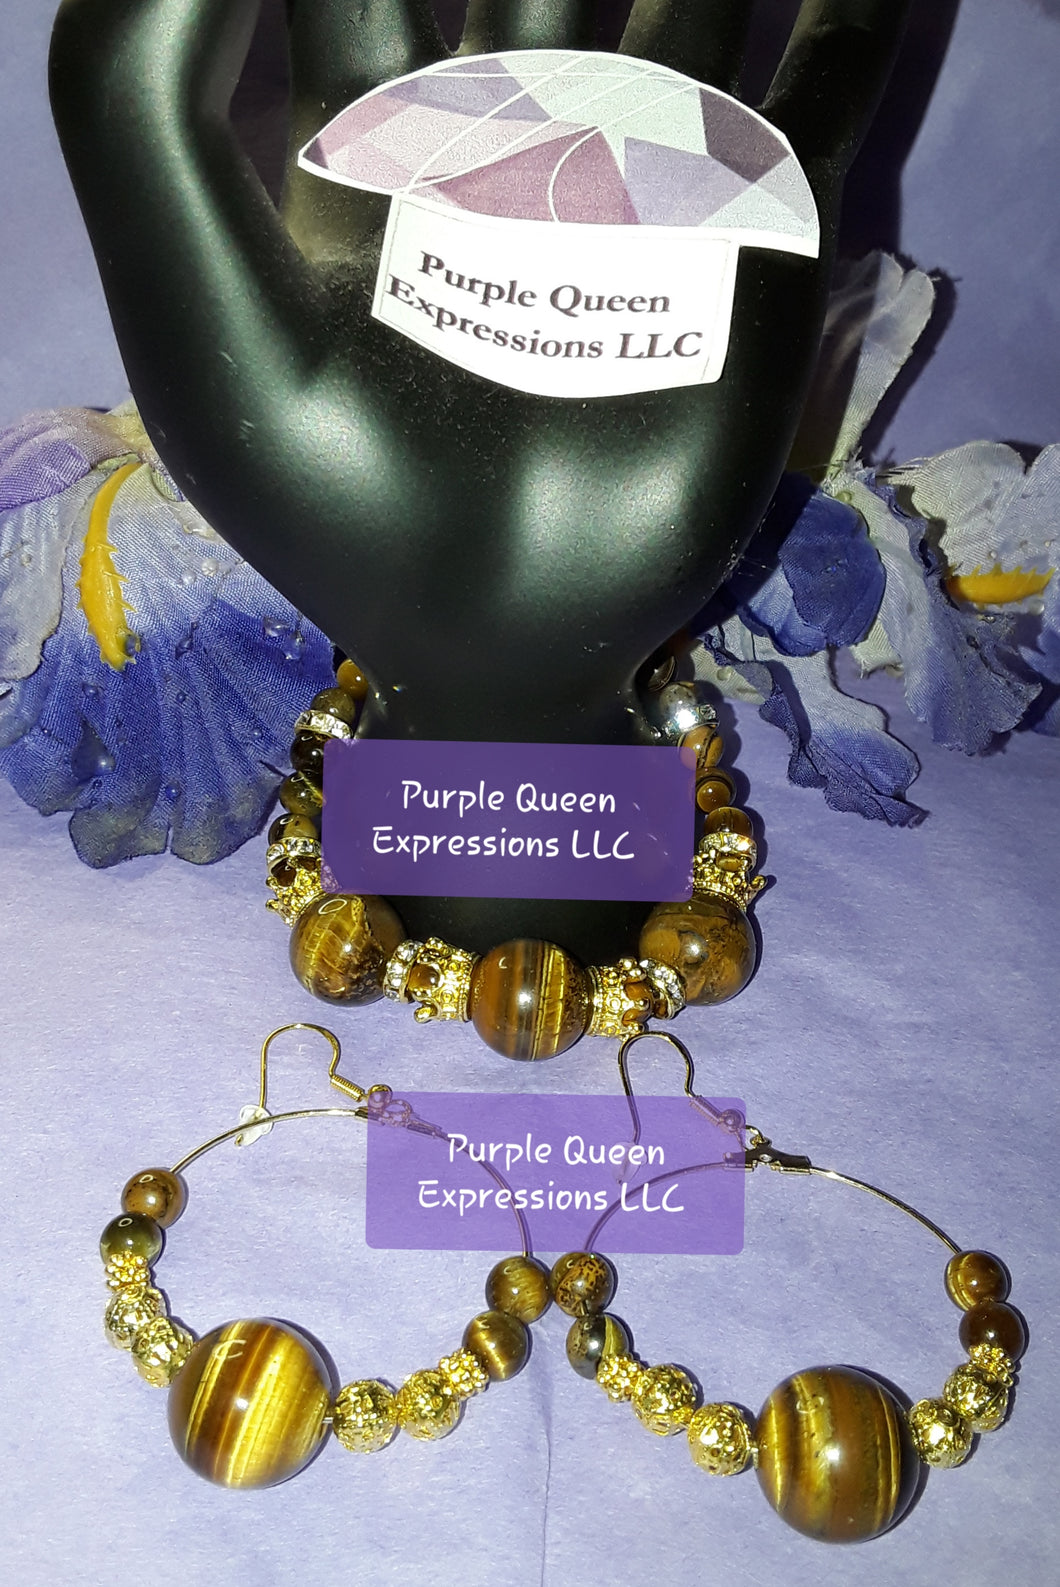 14mm Tigers Eye Large Gold Hoop Earrings and matching Bracelet. *All metal materials are hypoallergenic.